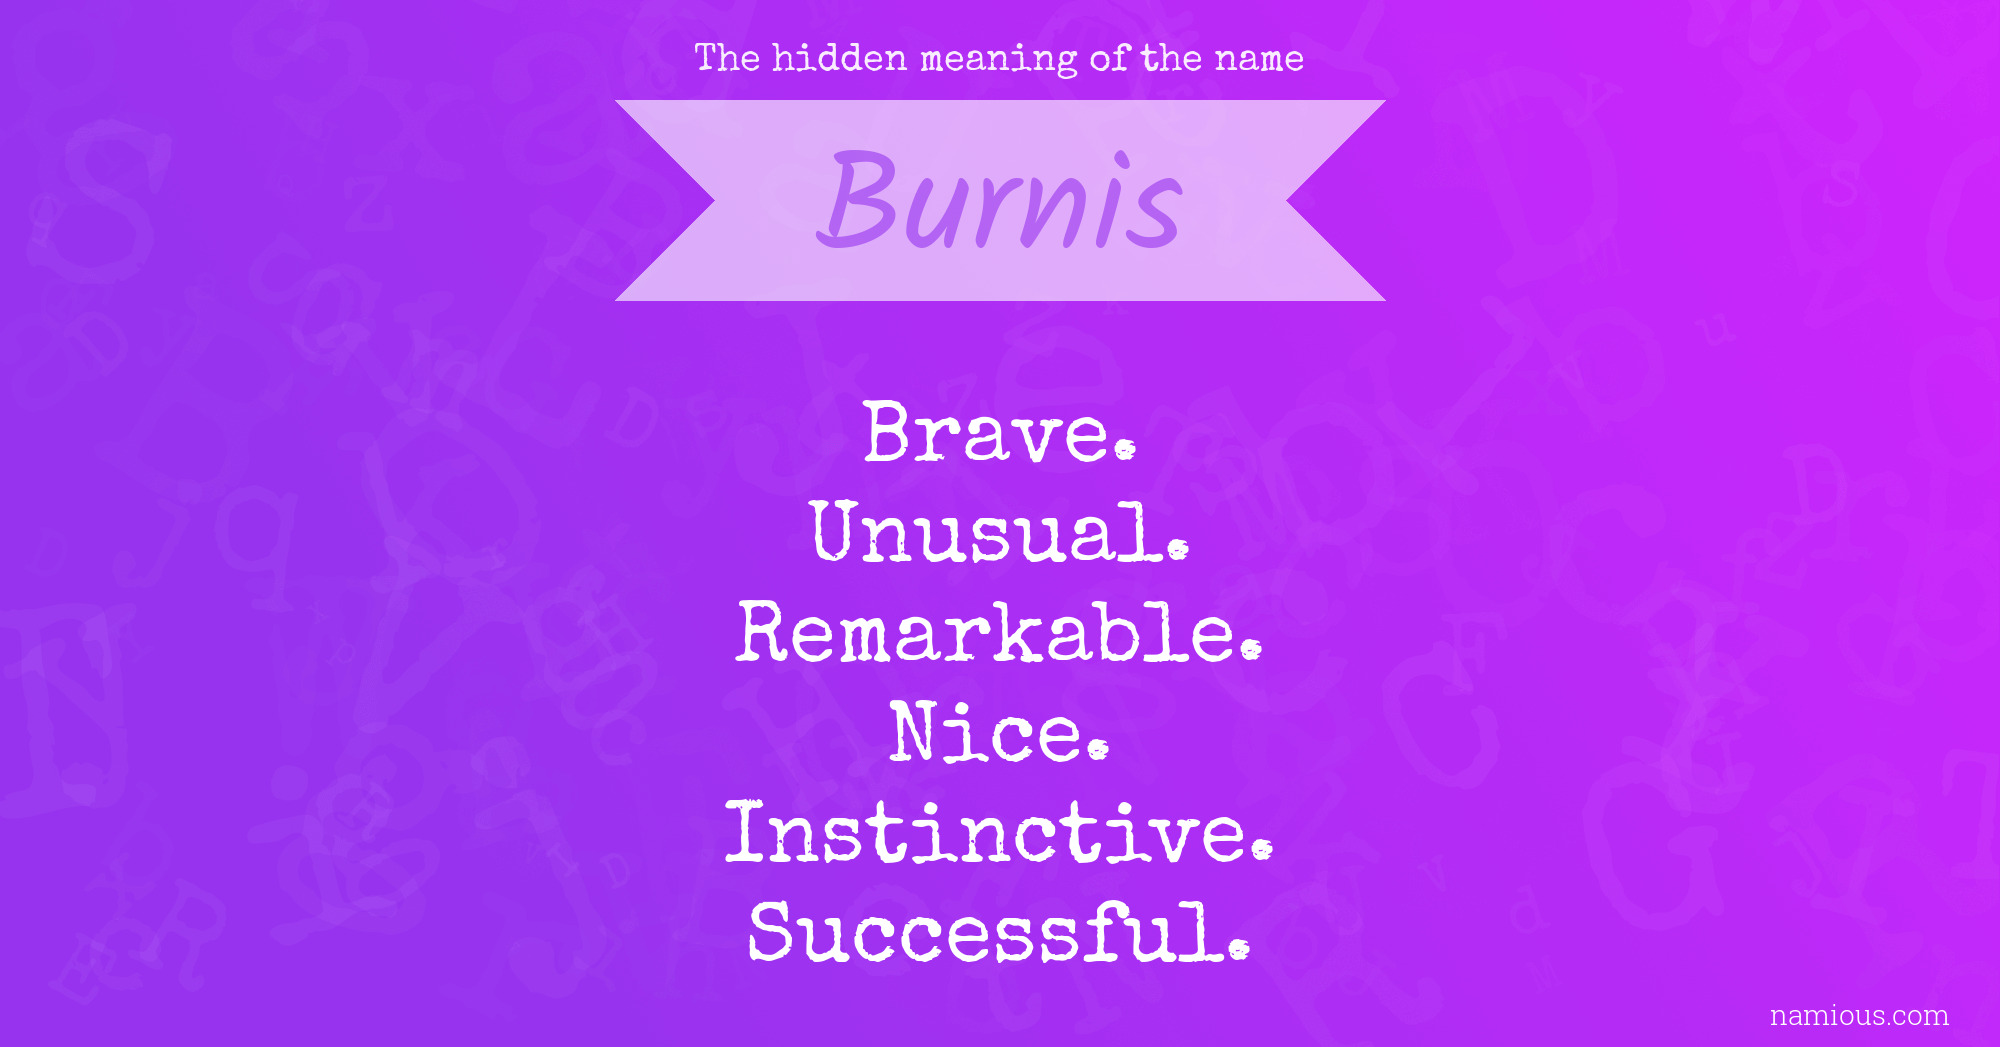 The hidden meaning of the name Burnis